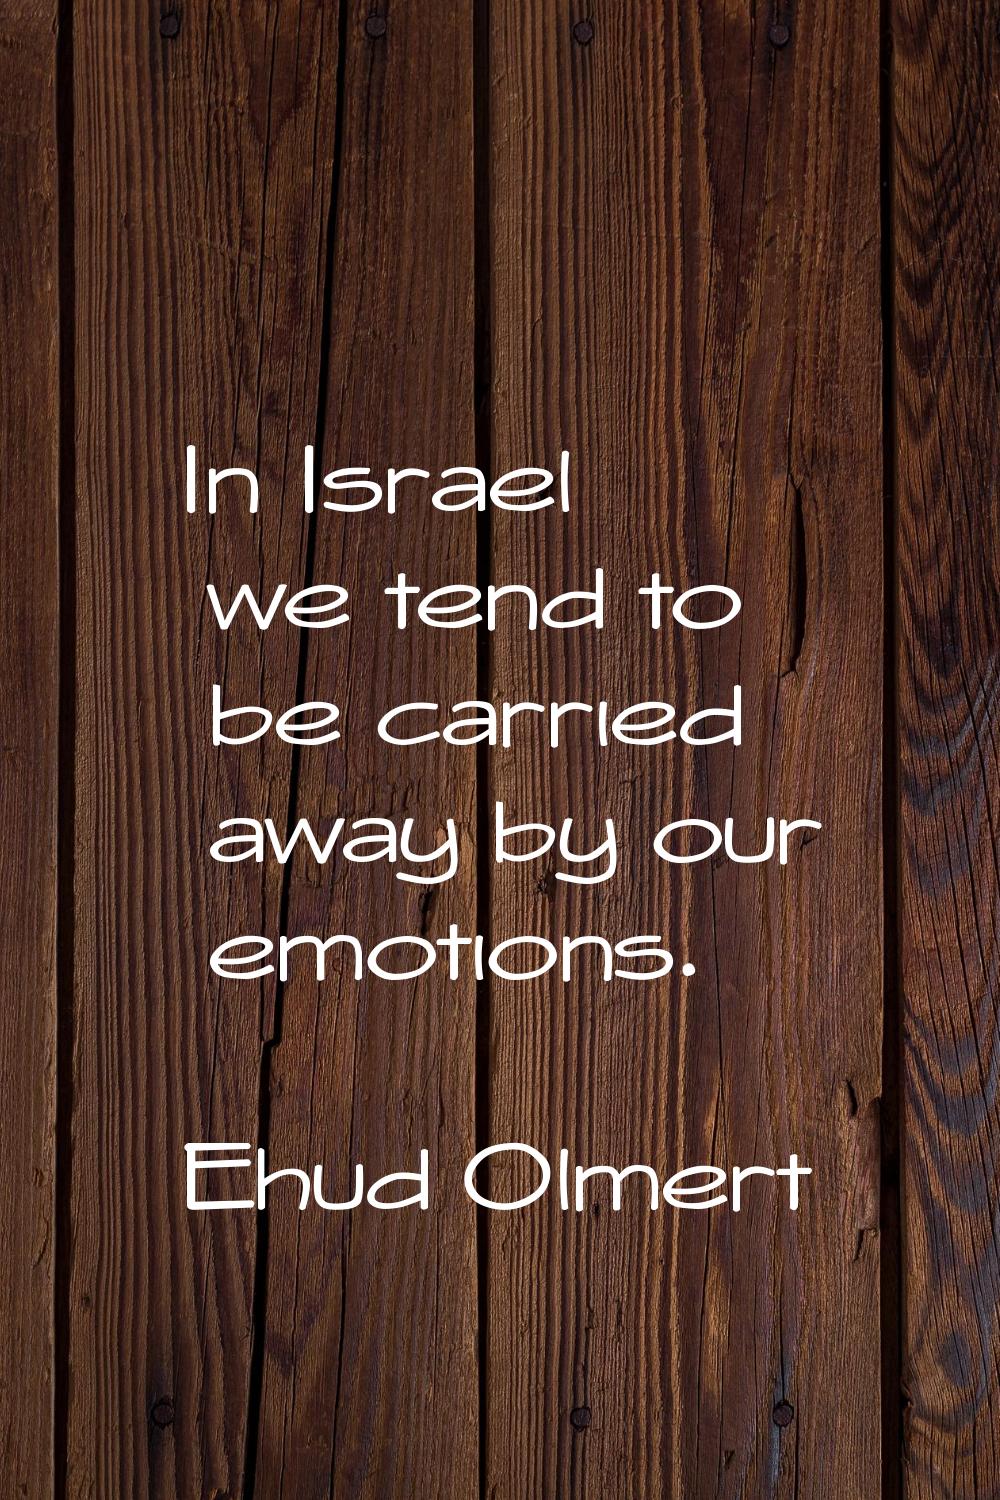 In Israel we tend to be carried away by our emotions.